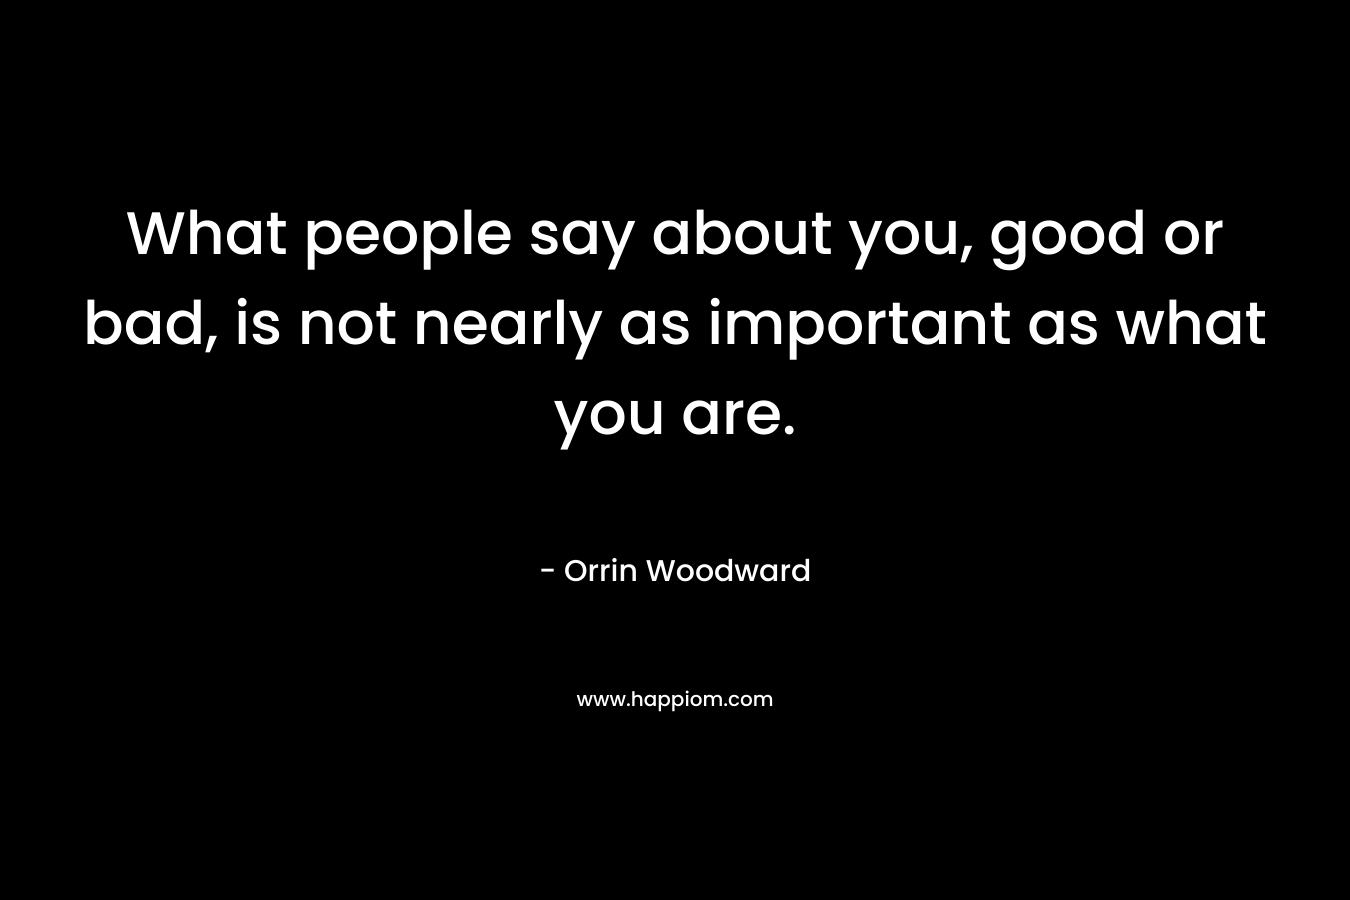 What people say about you, good or bad, is not nearly as important as what you are.